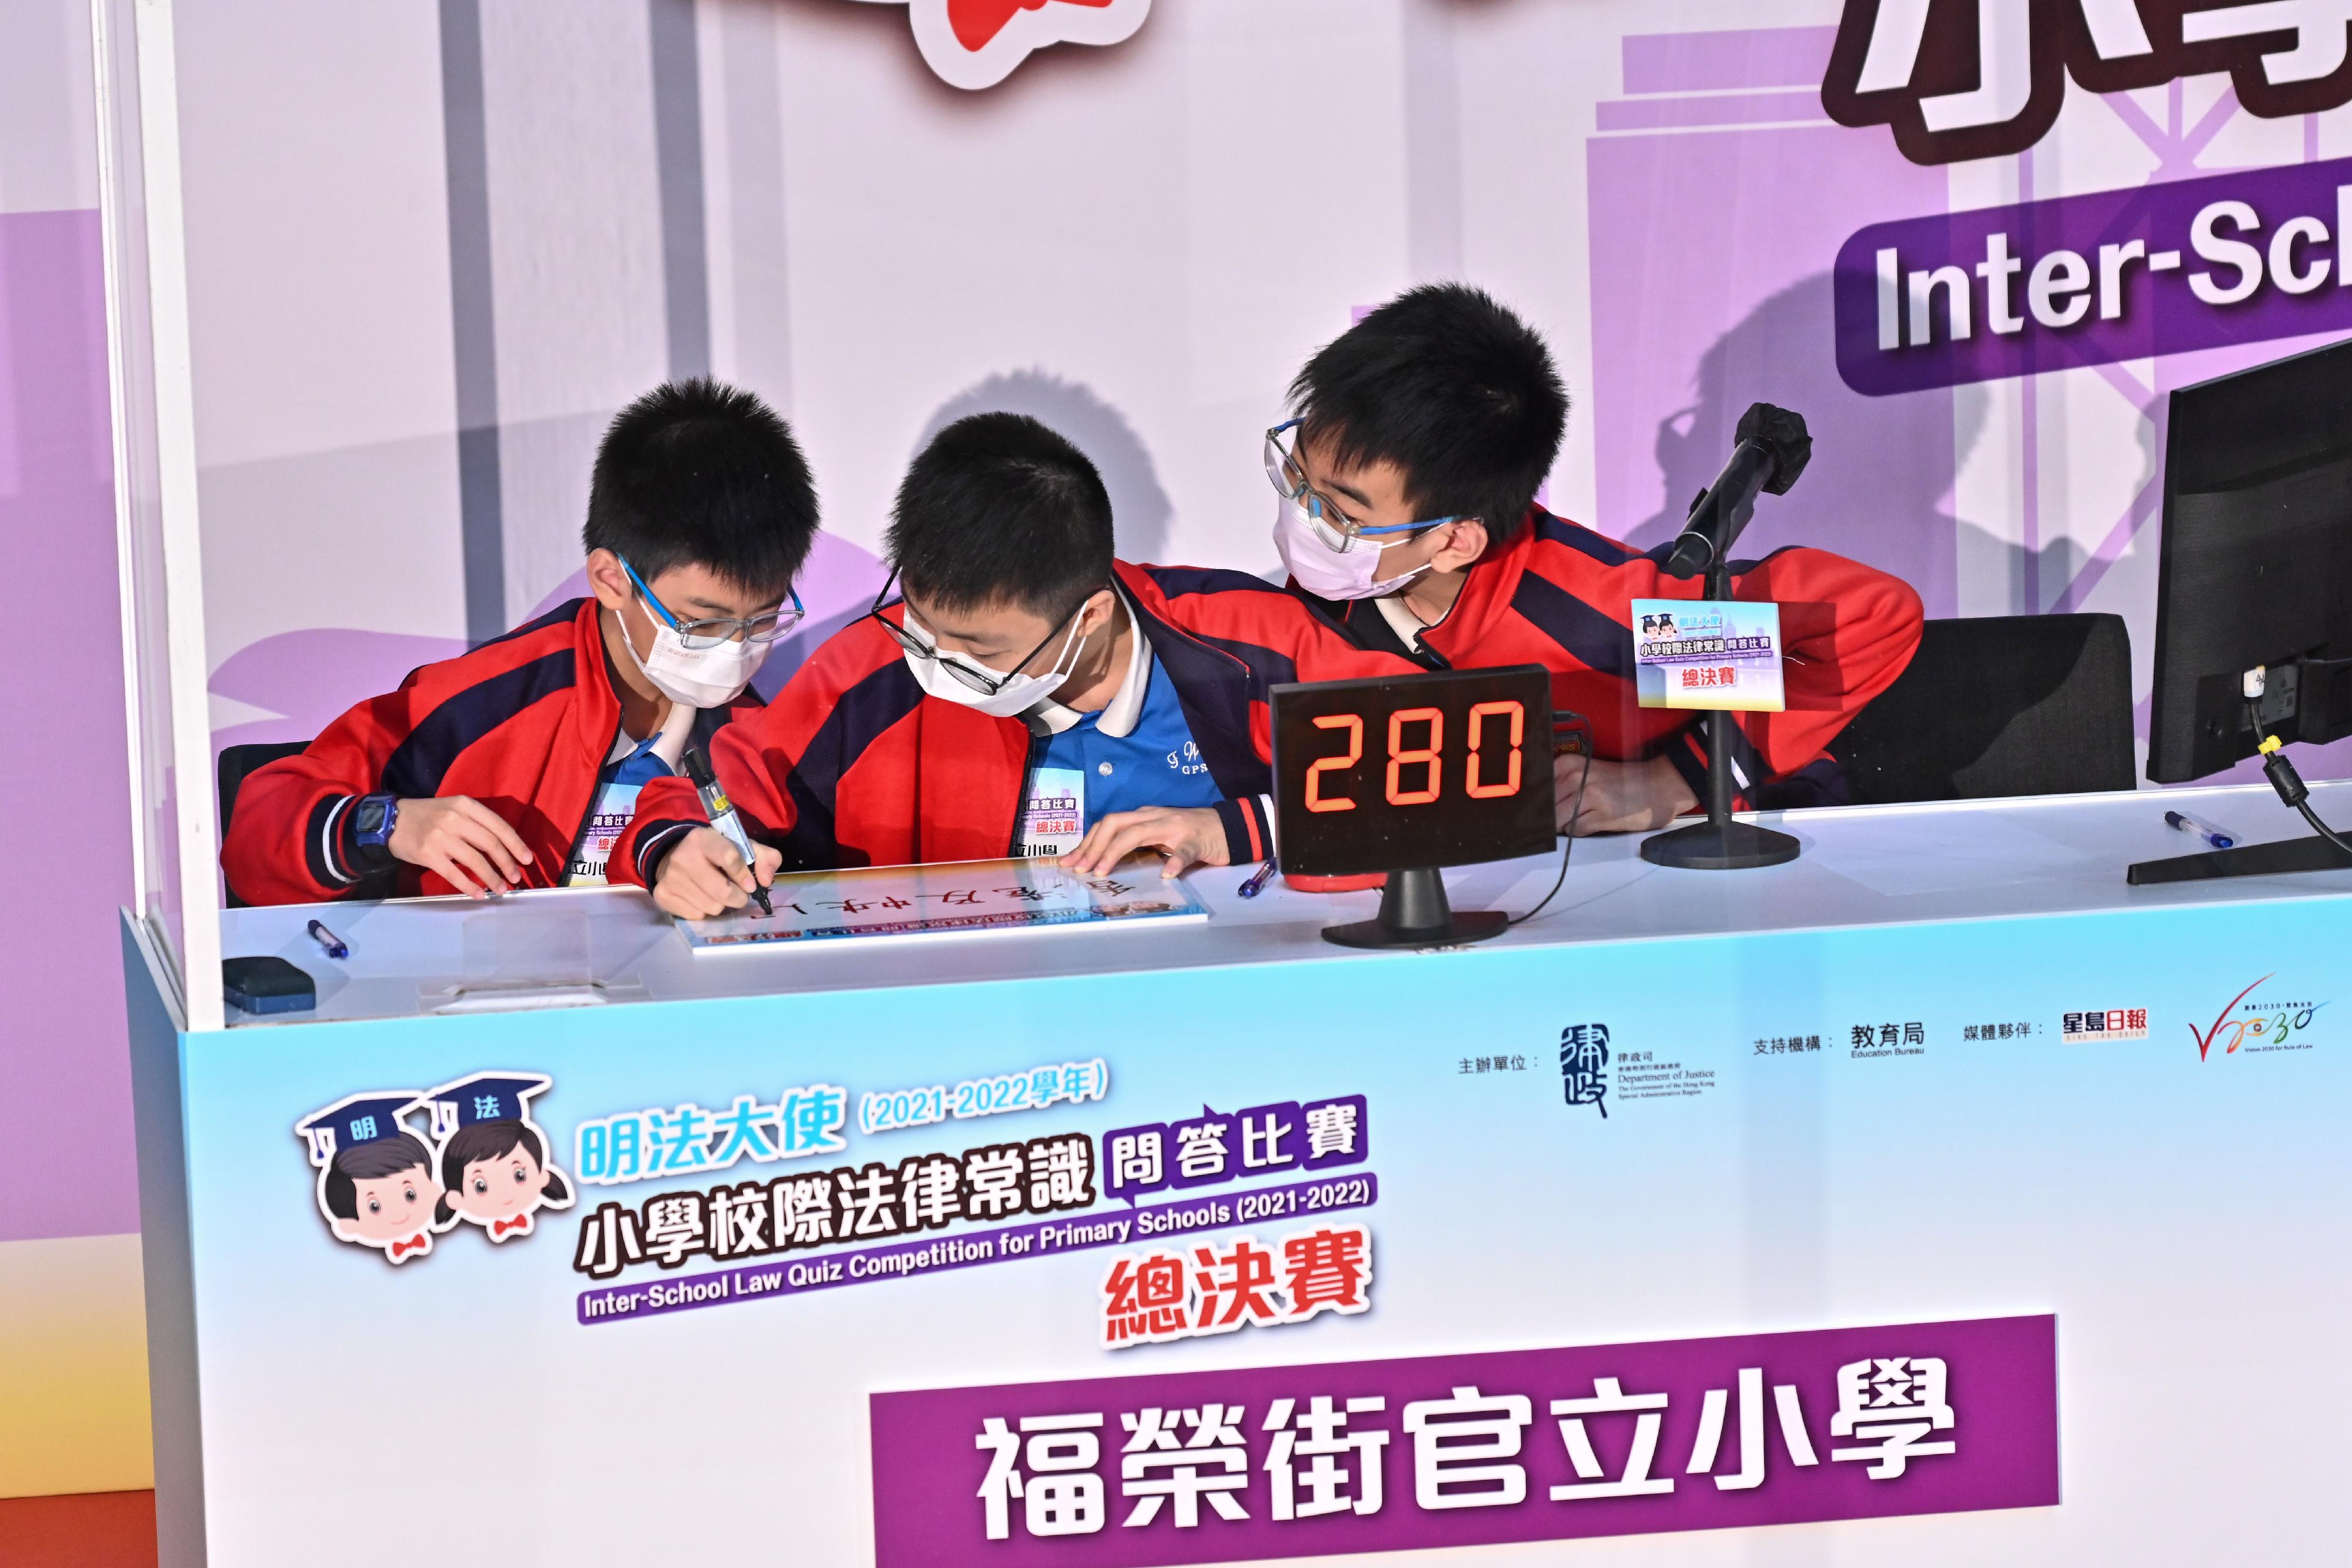 The Grand Final of the Inter-School Law Quiz Competition for primary school students, organised by the Department of Justice and supported by the Education Bureau, was successfully held today (June 27) at the M+ museum. Photo shows a participating team engaging in the competition.